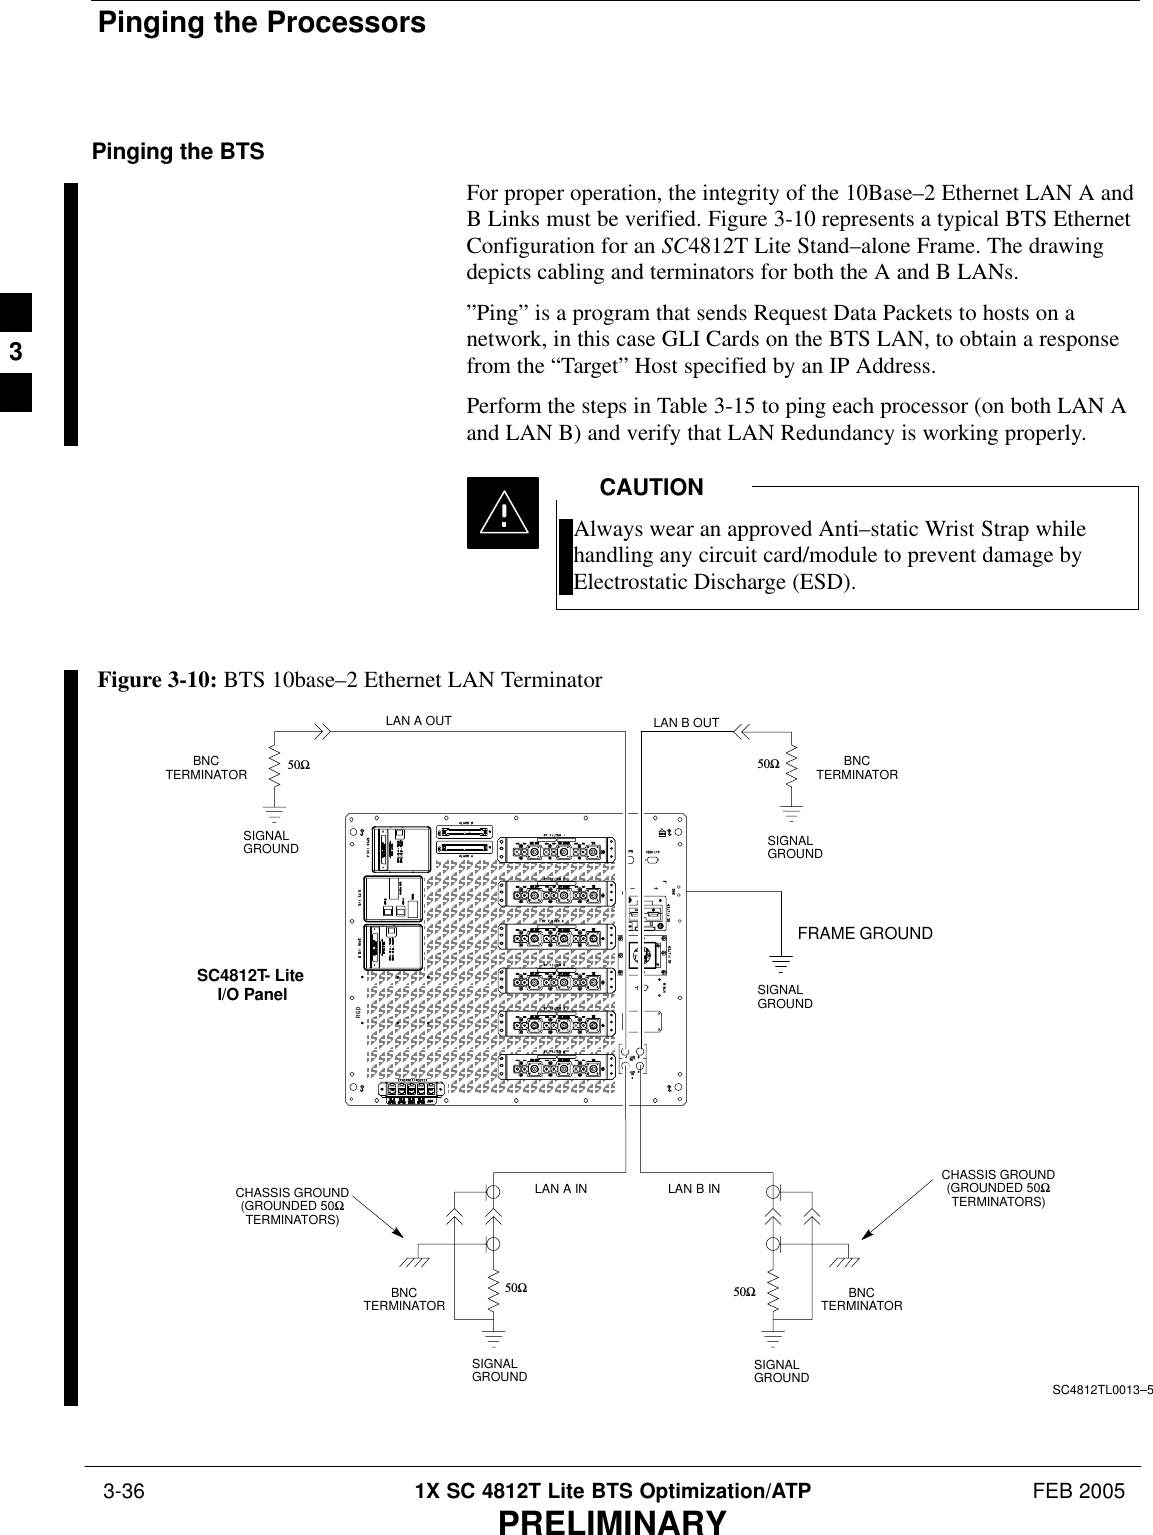 Pinging the Processors 3-36 1X SC 4812T Lite BTS Optimization/ATP FEB 2005PRELIMINARYPinging the BTSFor proper operation, the integrity of the 10Base–2 Ethernet LAN A andB Links must be verified. Figure 3-10 represents a typical BTS EthernetConfiguration for an SC4812T Lite Stand–alone Frame. The drawingdepicts cabling and terminators for both the A and B LANs.”Ping” is a program that sends Request Data Packets to hosts on anetwork, in this case GLI Cards on the BTS LAN, to obtain a responsefrom the “Target” Host specified by an IP Address.Perform the steps in Table 3-15 to ping each processor (on both LAN Aand LAN B) and verify that LAN Redundancy is working properly.Always wear an approved Anti–static Wrist Strap whilehandling any circuit card/module to prevent damage byElectrostatic Discharge (ESD).CAUTIONFigure 3-10: BTS 10base–2 Ethernet LAN TerminatorSIGNALGROUNDSIGNALGROUND50ΩSIGNALGROUND50Ω50ΩSIGNALGROUND50ΩSIGNALGROUNDFRAME GROUNDBNCTERMINATORBNCTERMINATORBNCTERMINATORLAN A INLAN A OUTSC4812TL0013–5BNCTERMINATORSC4812T- Lite I/O PanelLAN B INLAN B OUTCHASSIS GROUND(GROUNDED 50ΩTERMINATORS)CHASSIS GROUND(GROUNDED 50ΩTERMINATORS)3